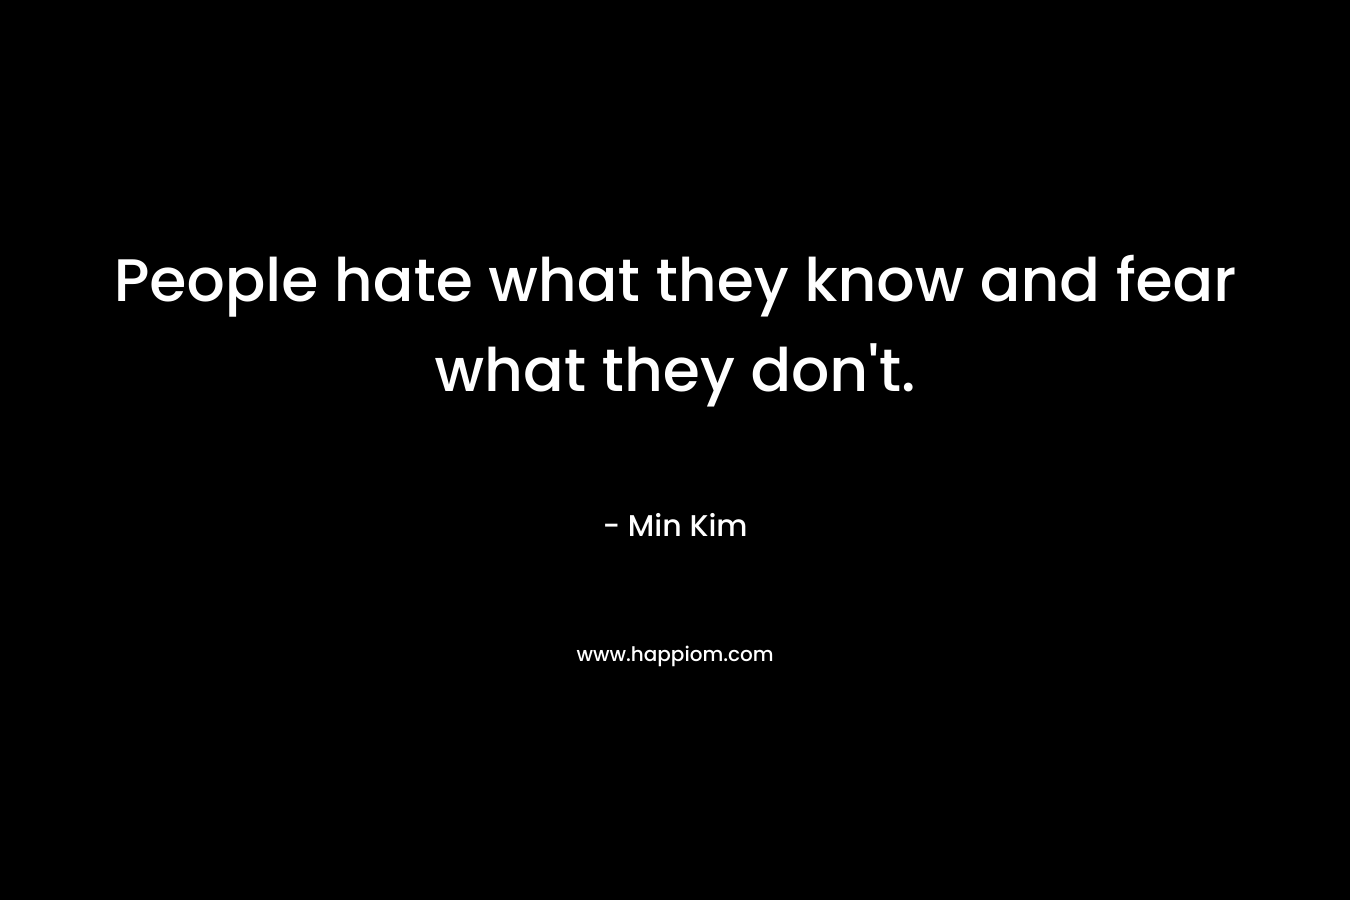 People hate what they know and fear what they don't.